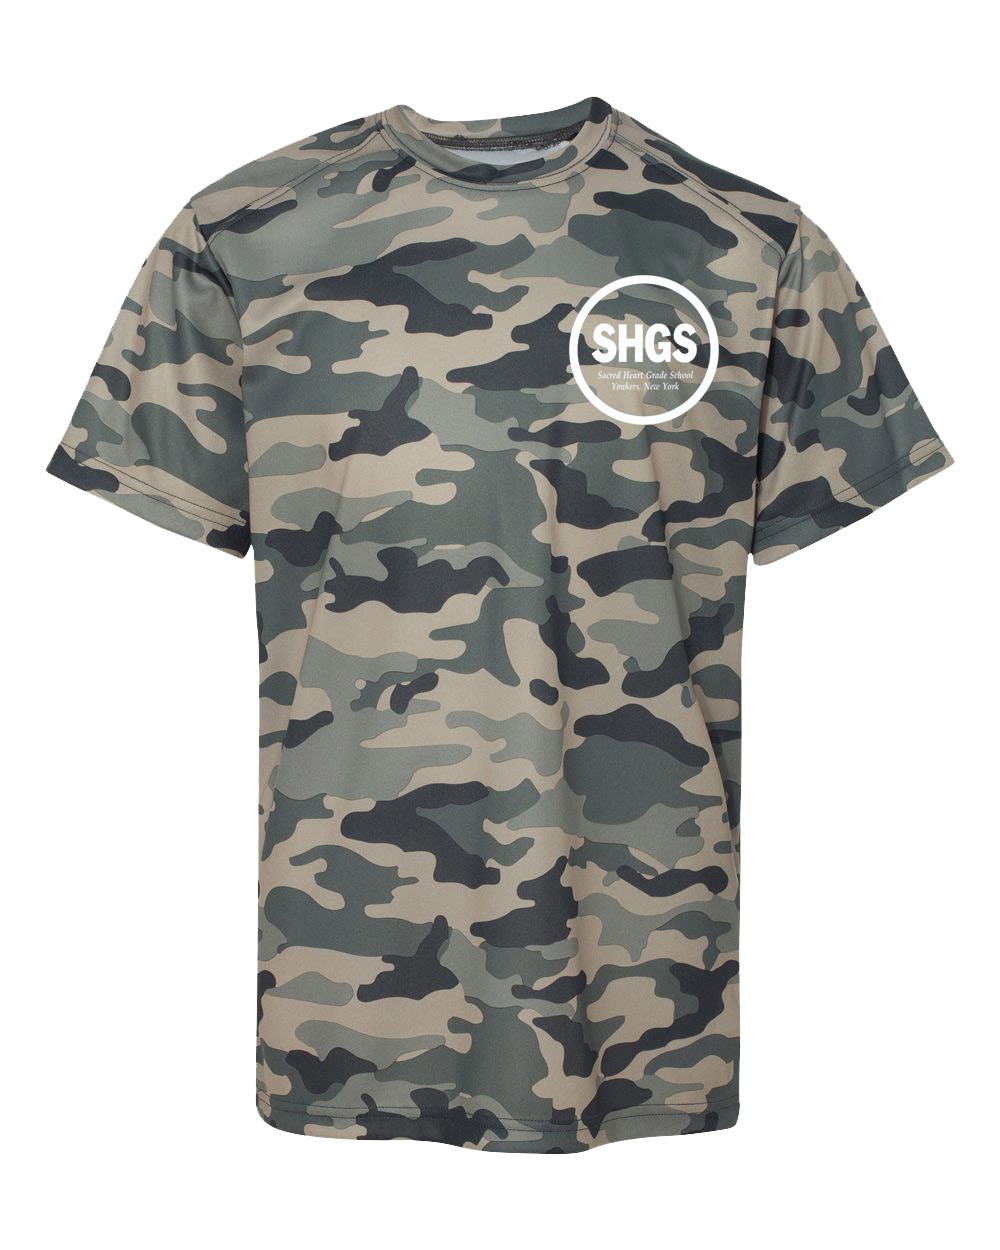 SHGS S/S Camo Spirit T-Shirt w/ White Logo - Please Allow 2-3 Weeks for Delivery